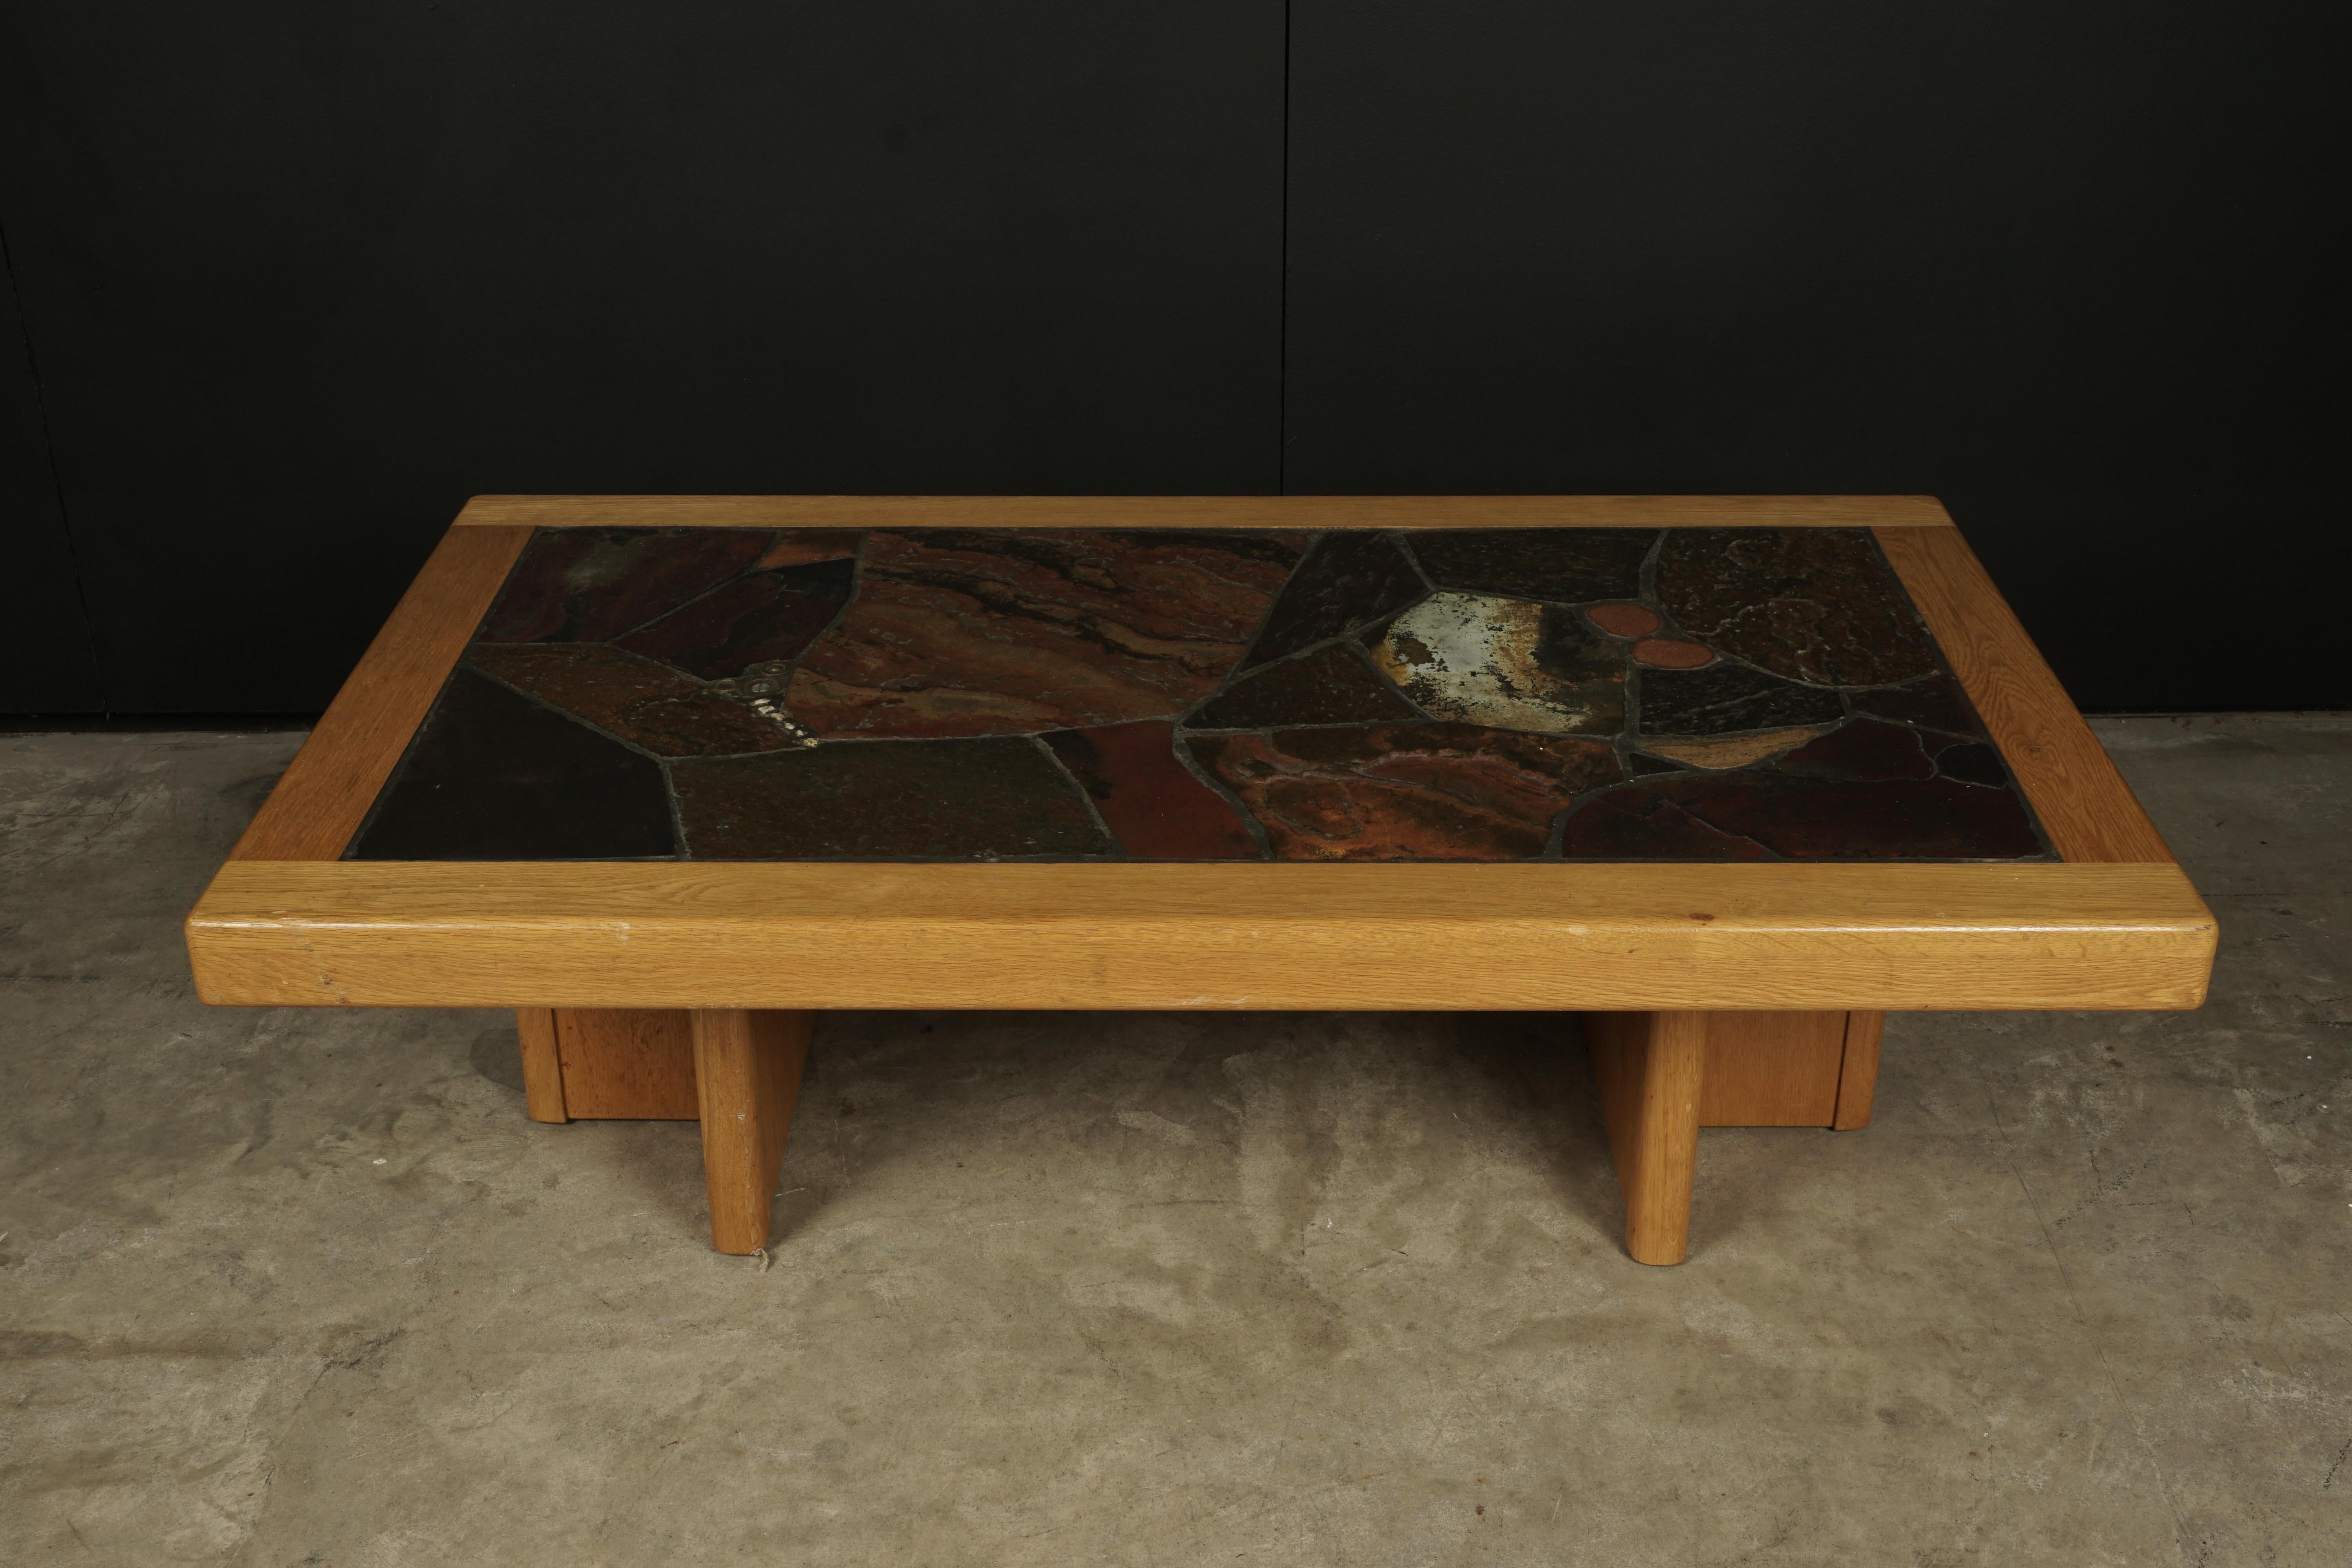 Vintage mosaic slate coffee table from France, circa 1960. Solid oak and slate construction. Light wear and patina.